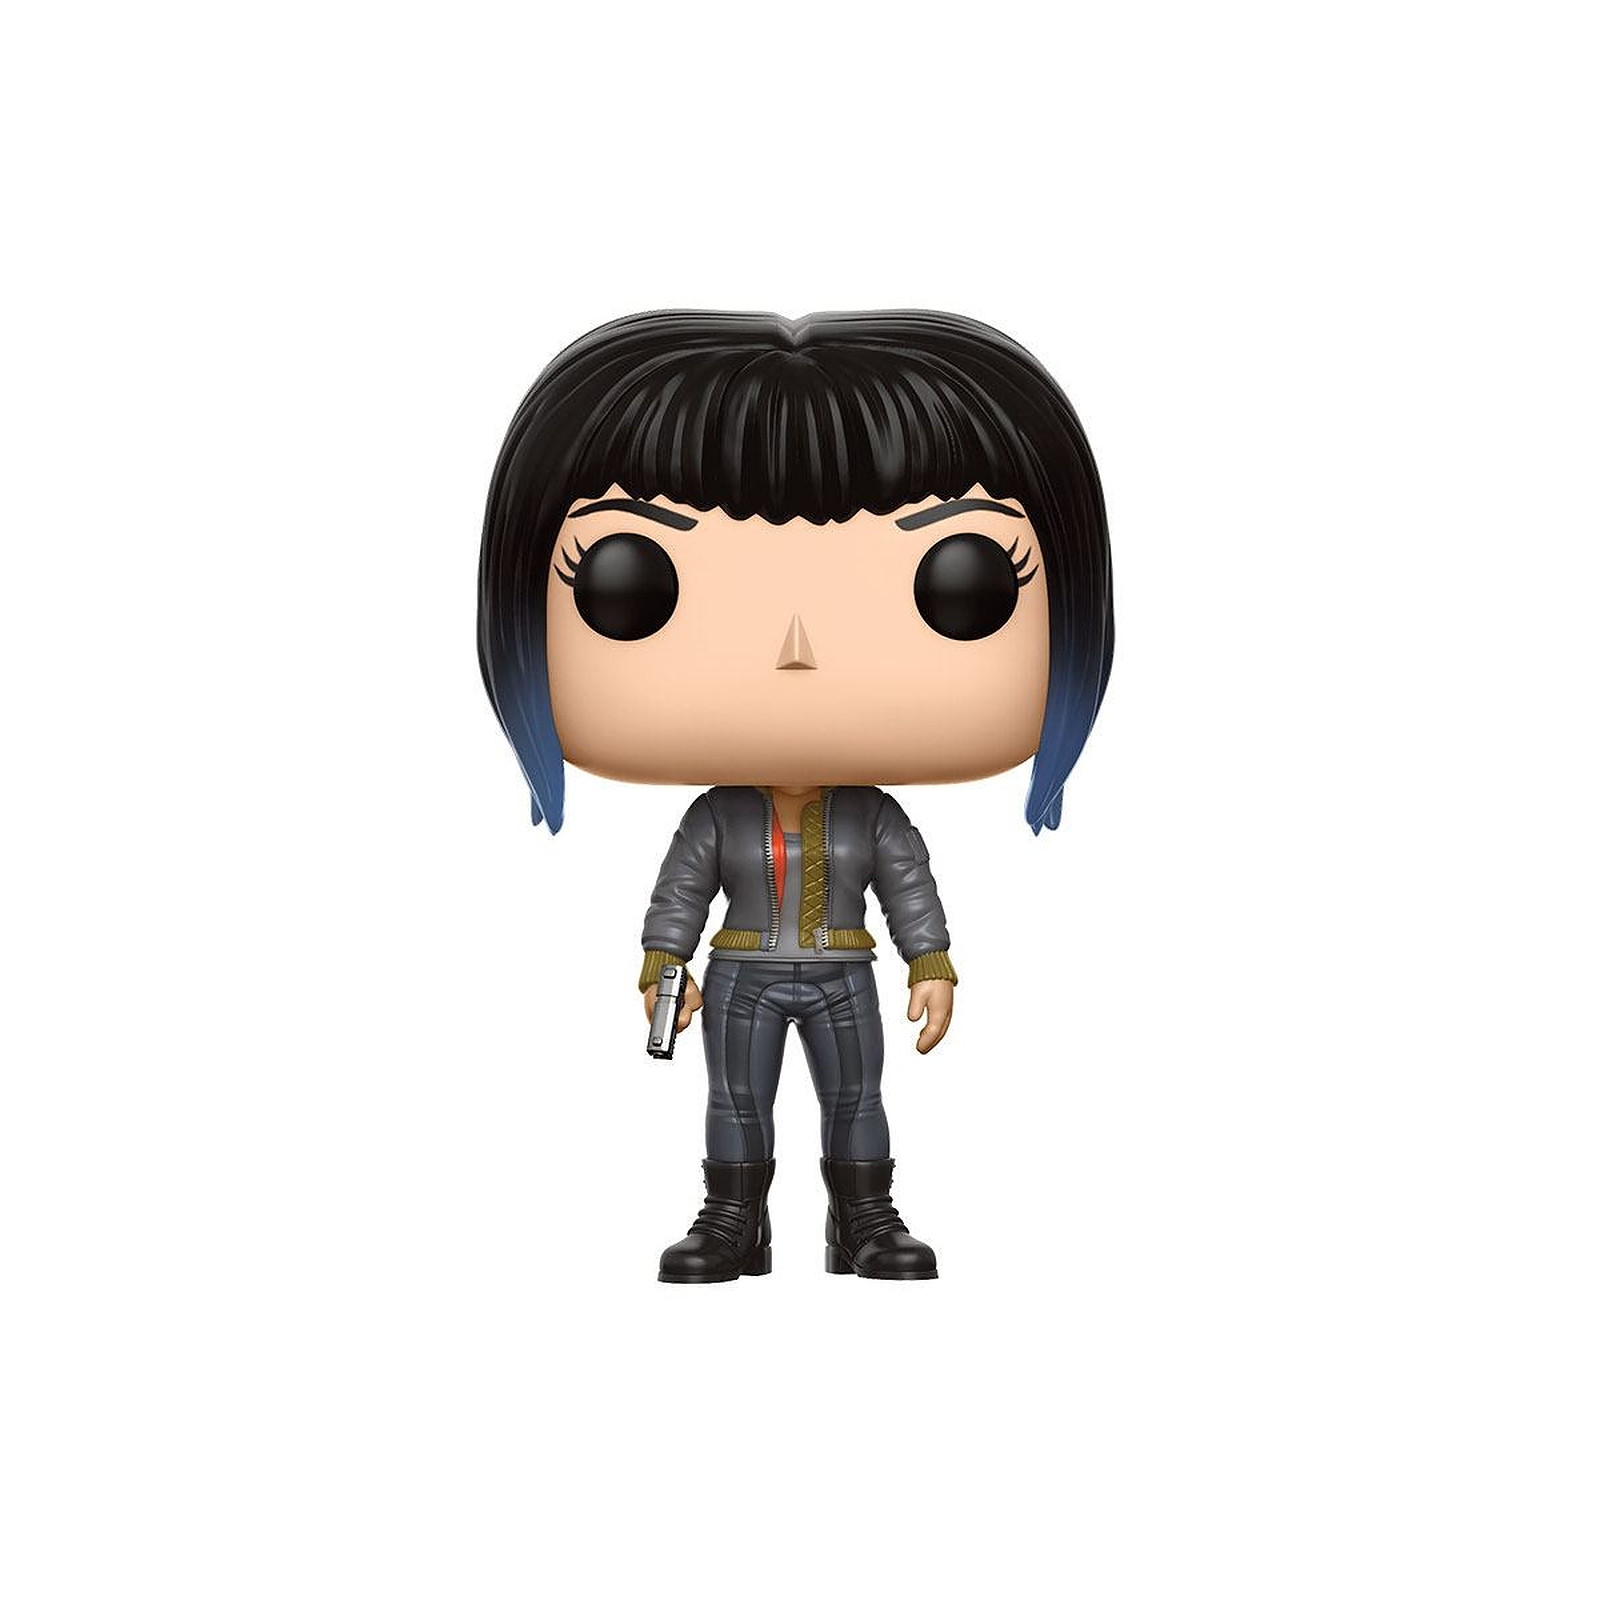 Ghost in the Shell - Figurine POP! Major (Bomber Jacket) 9 cm - Figurines Funko